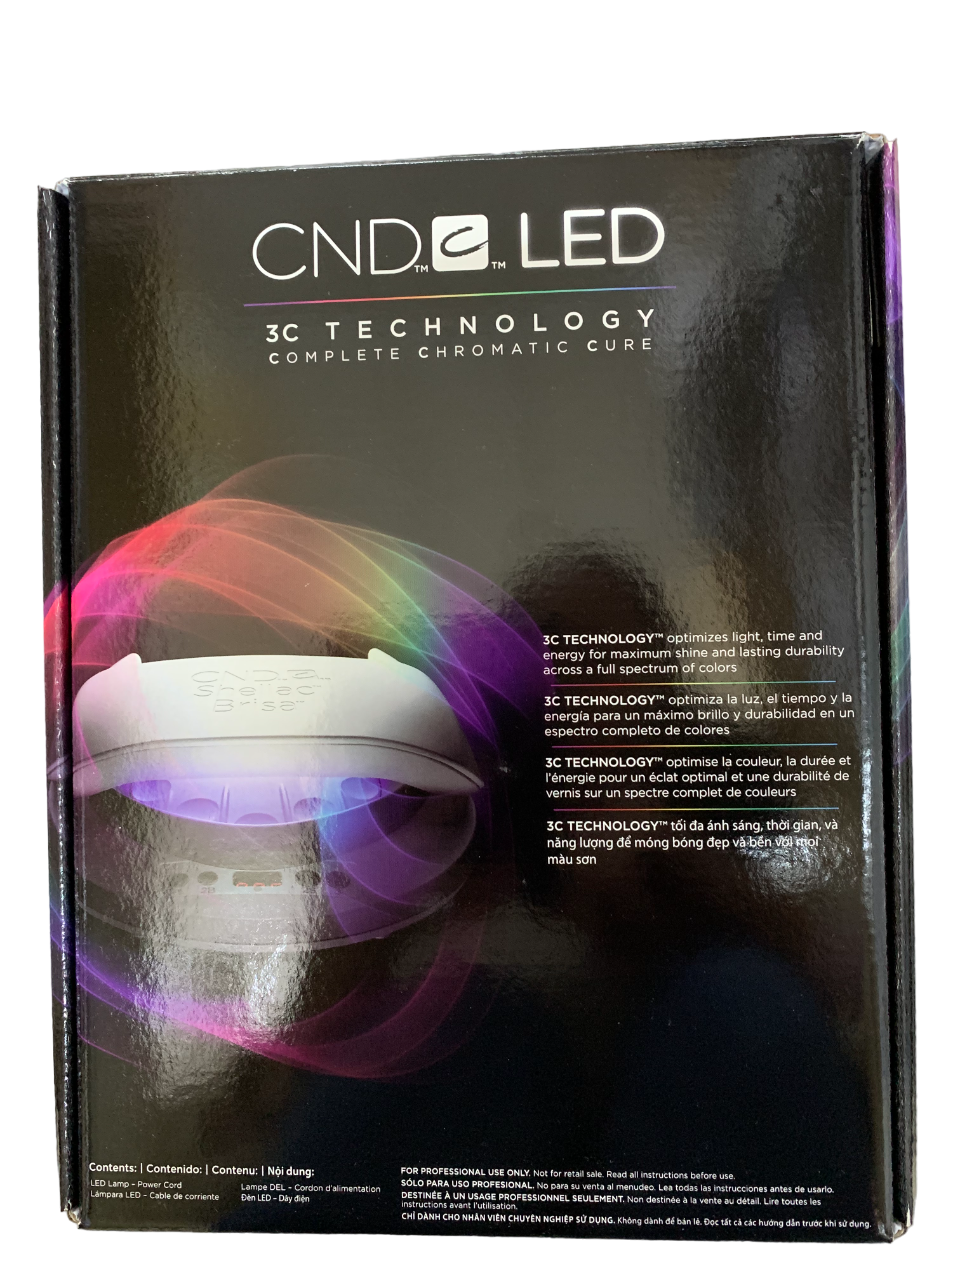 CND LED 3C Technology Complete Chromatic Cure